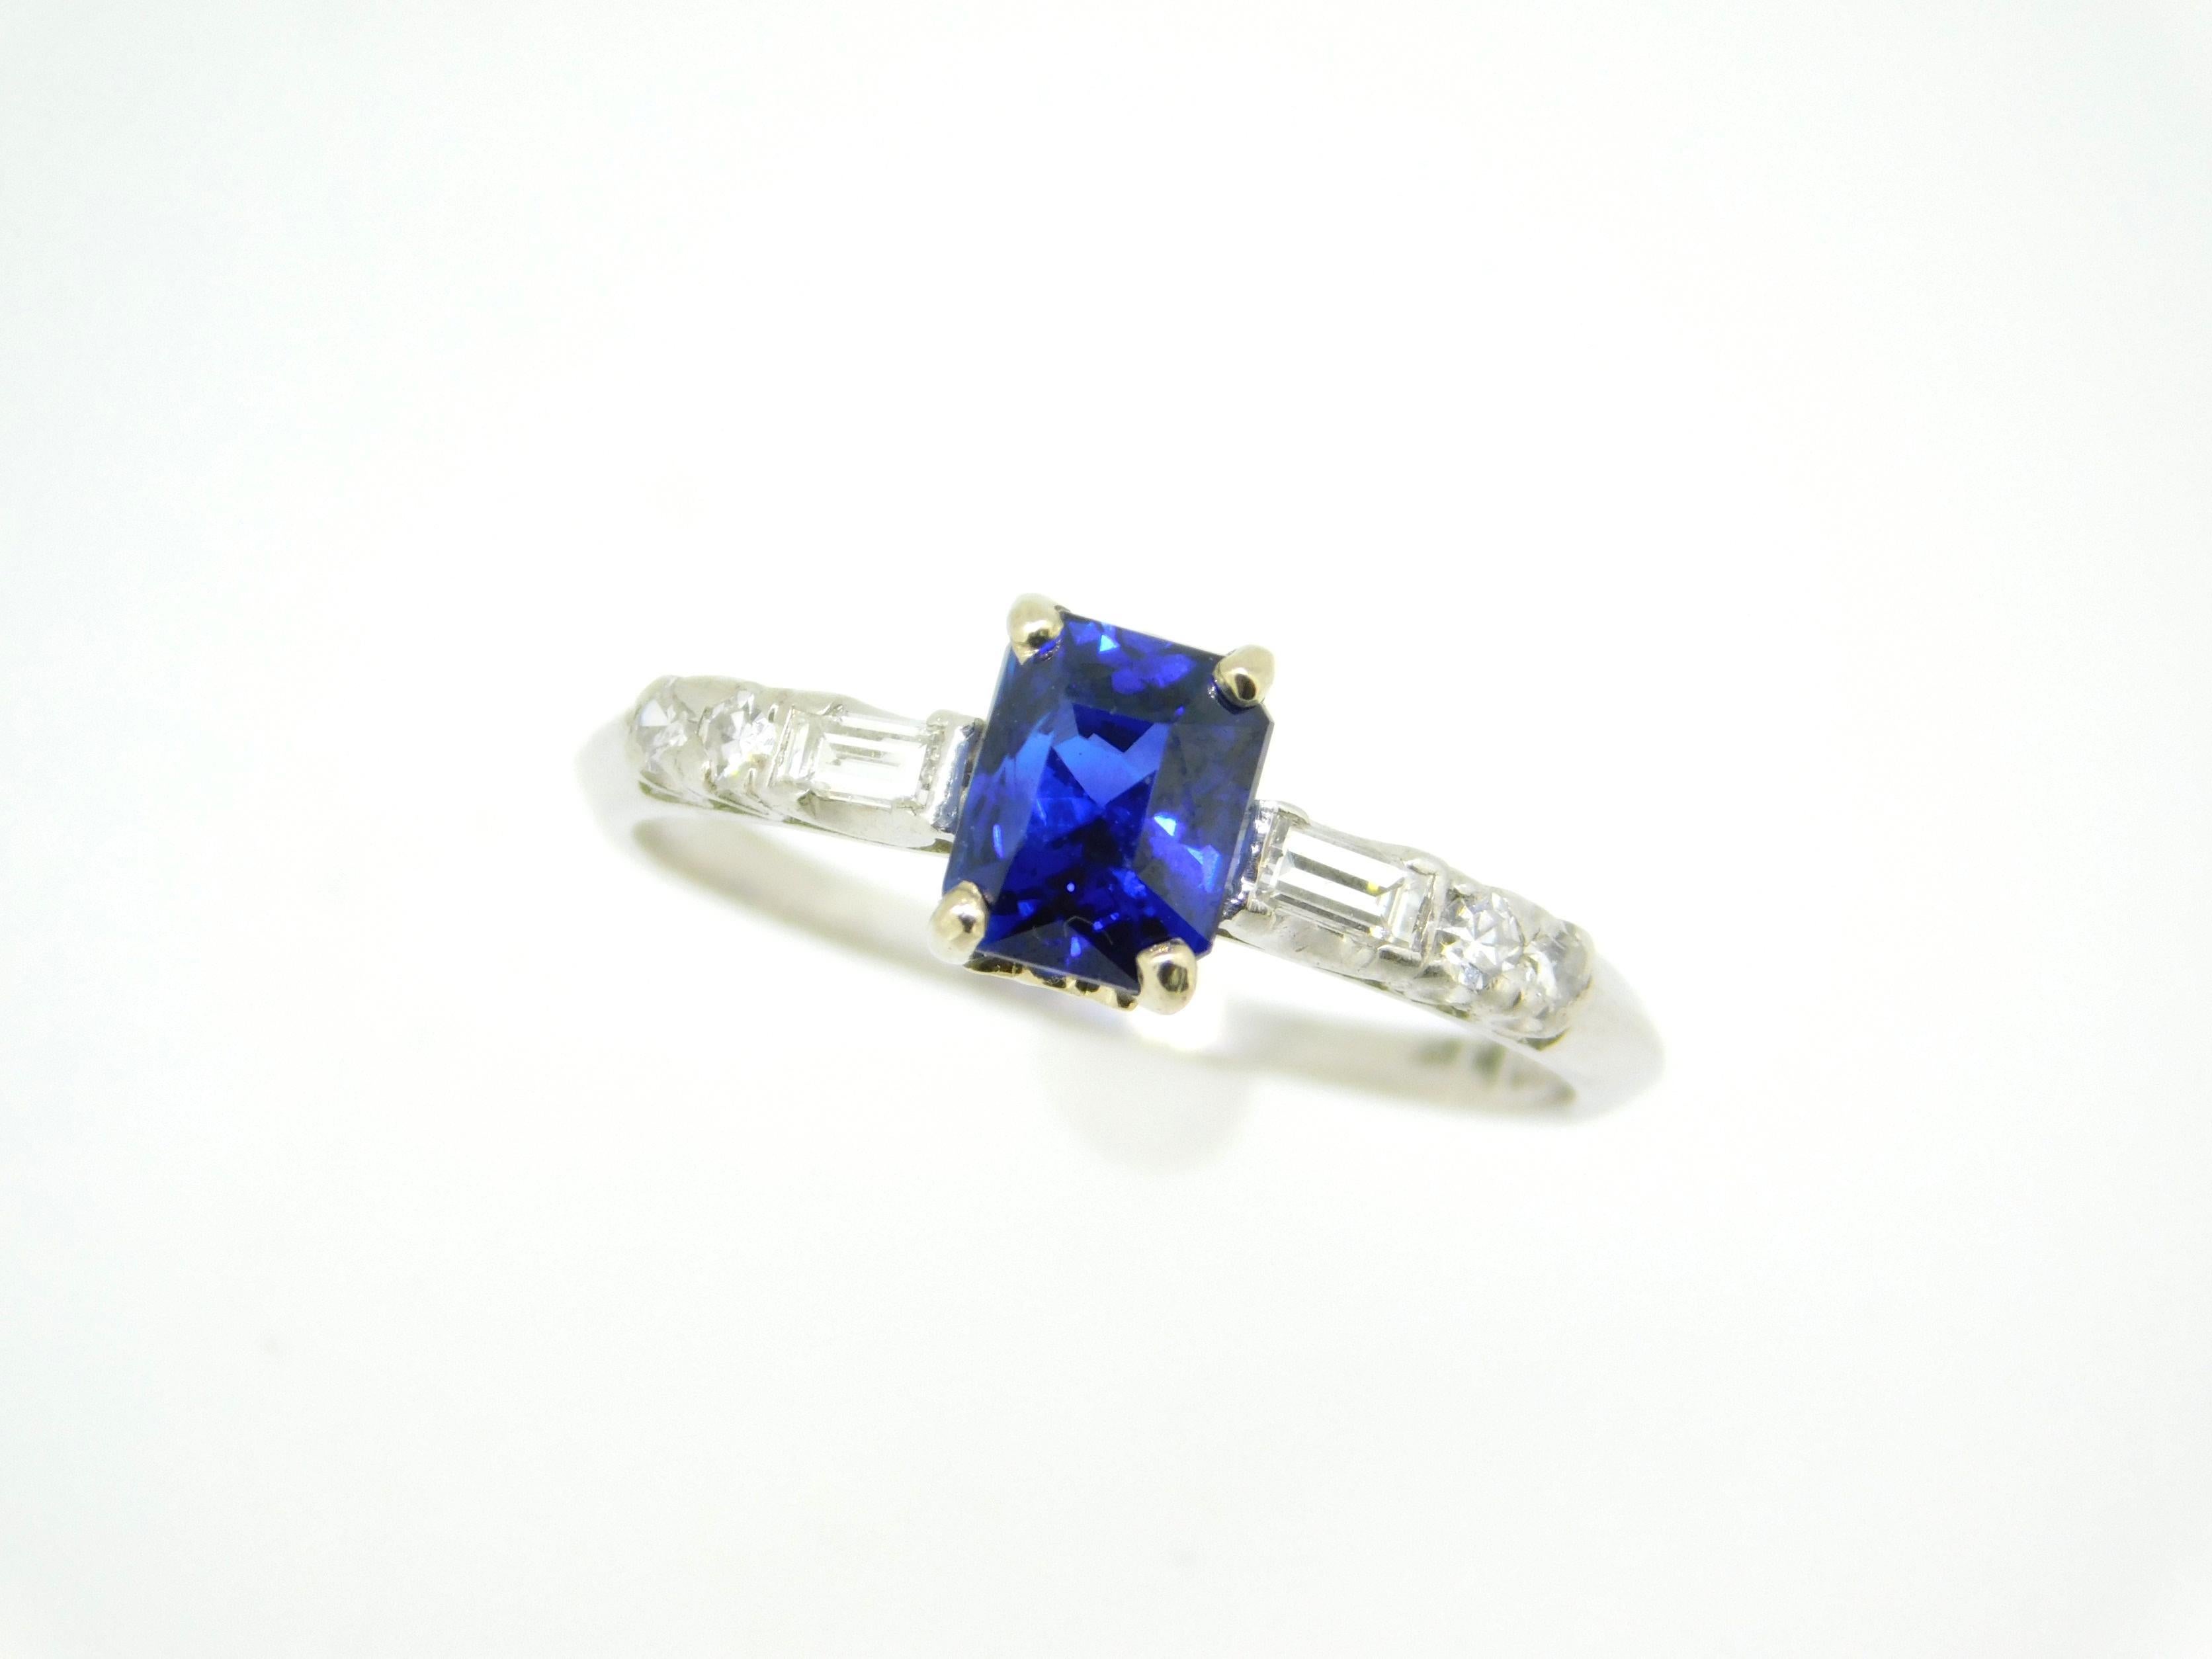 Platinum 1.05ct Blue Genuine Natural Sapphire and Diamond Ring (#J5052)

Platinum blue sapphire and diamond ring featuring a radiant cut sapphire weighing 1.05 carats. The sapphire has fine royal blue color and measures 5.65mm x 4.47mm. The sapphire